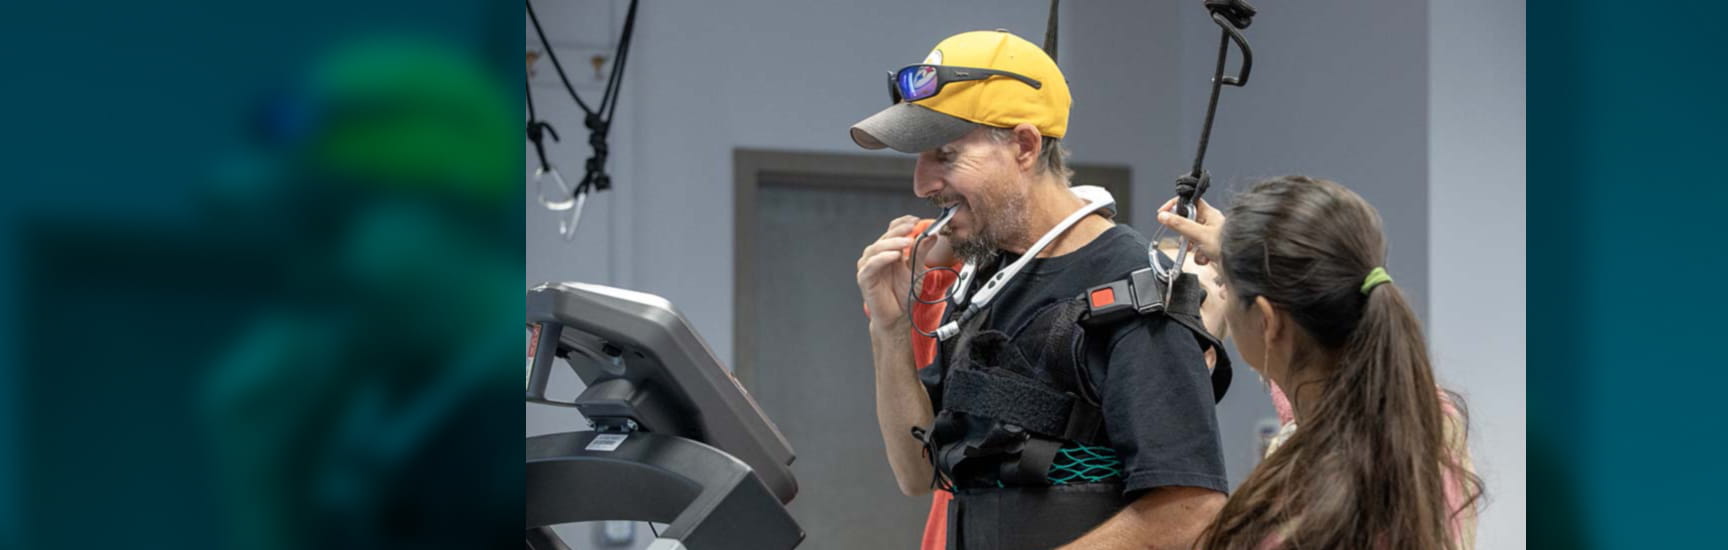 Man wearing a baseball cap puts a device in his mouth. A harness is helping to support him, as is a woman standing beside him.